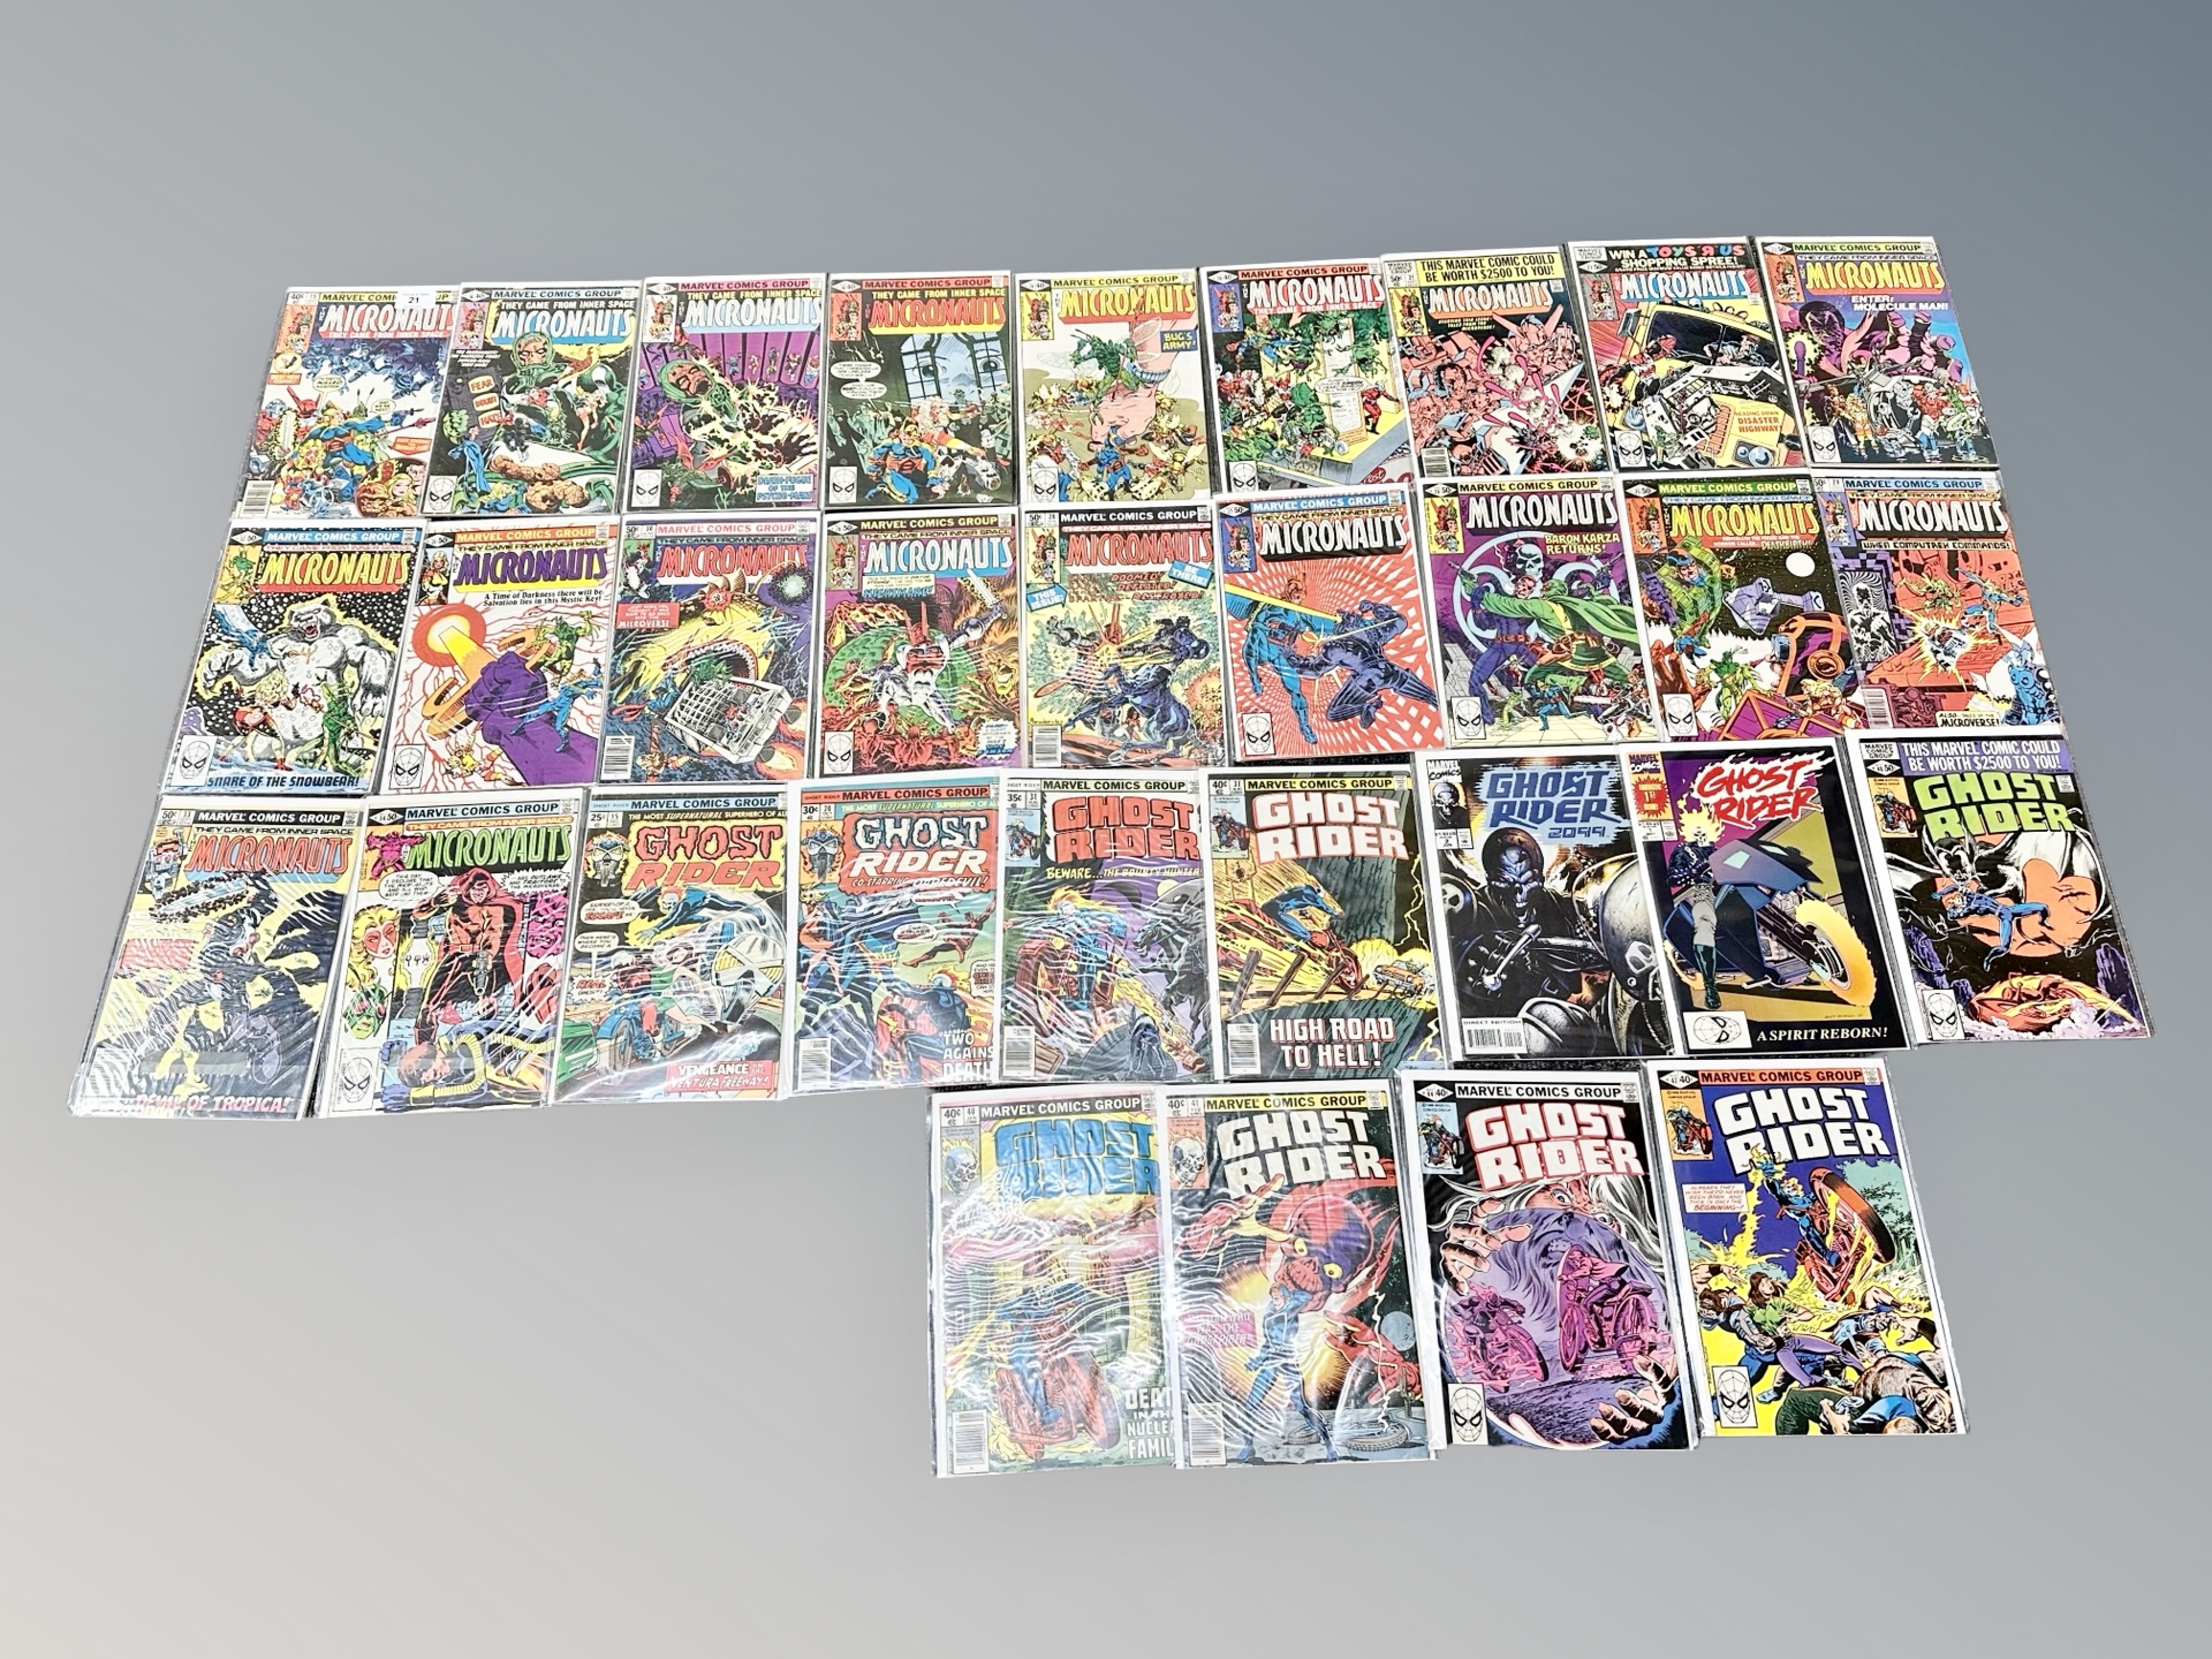 Marvel Comics : The Micronauts issues 15 to 33, together with Ghost Rider and Ghost Rider 2099,